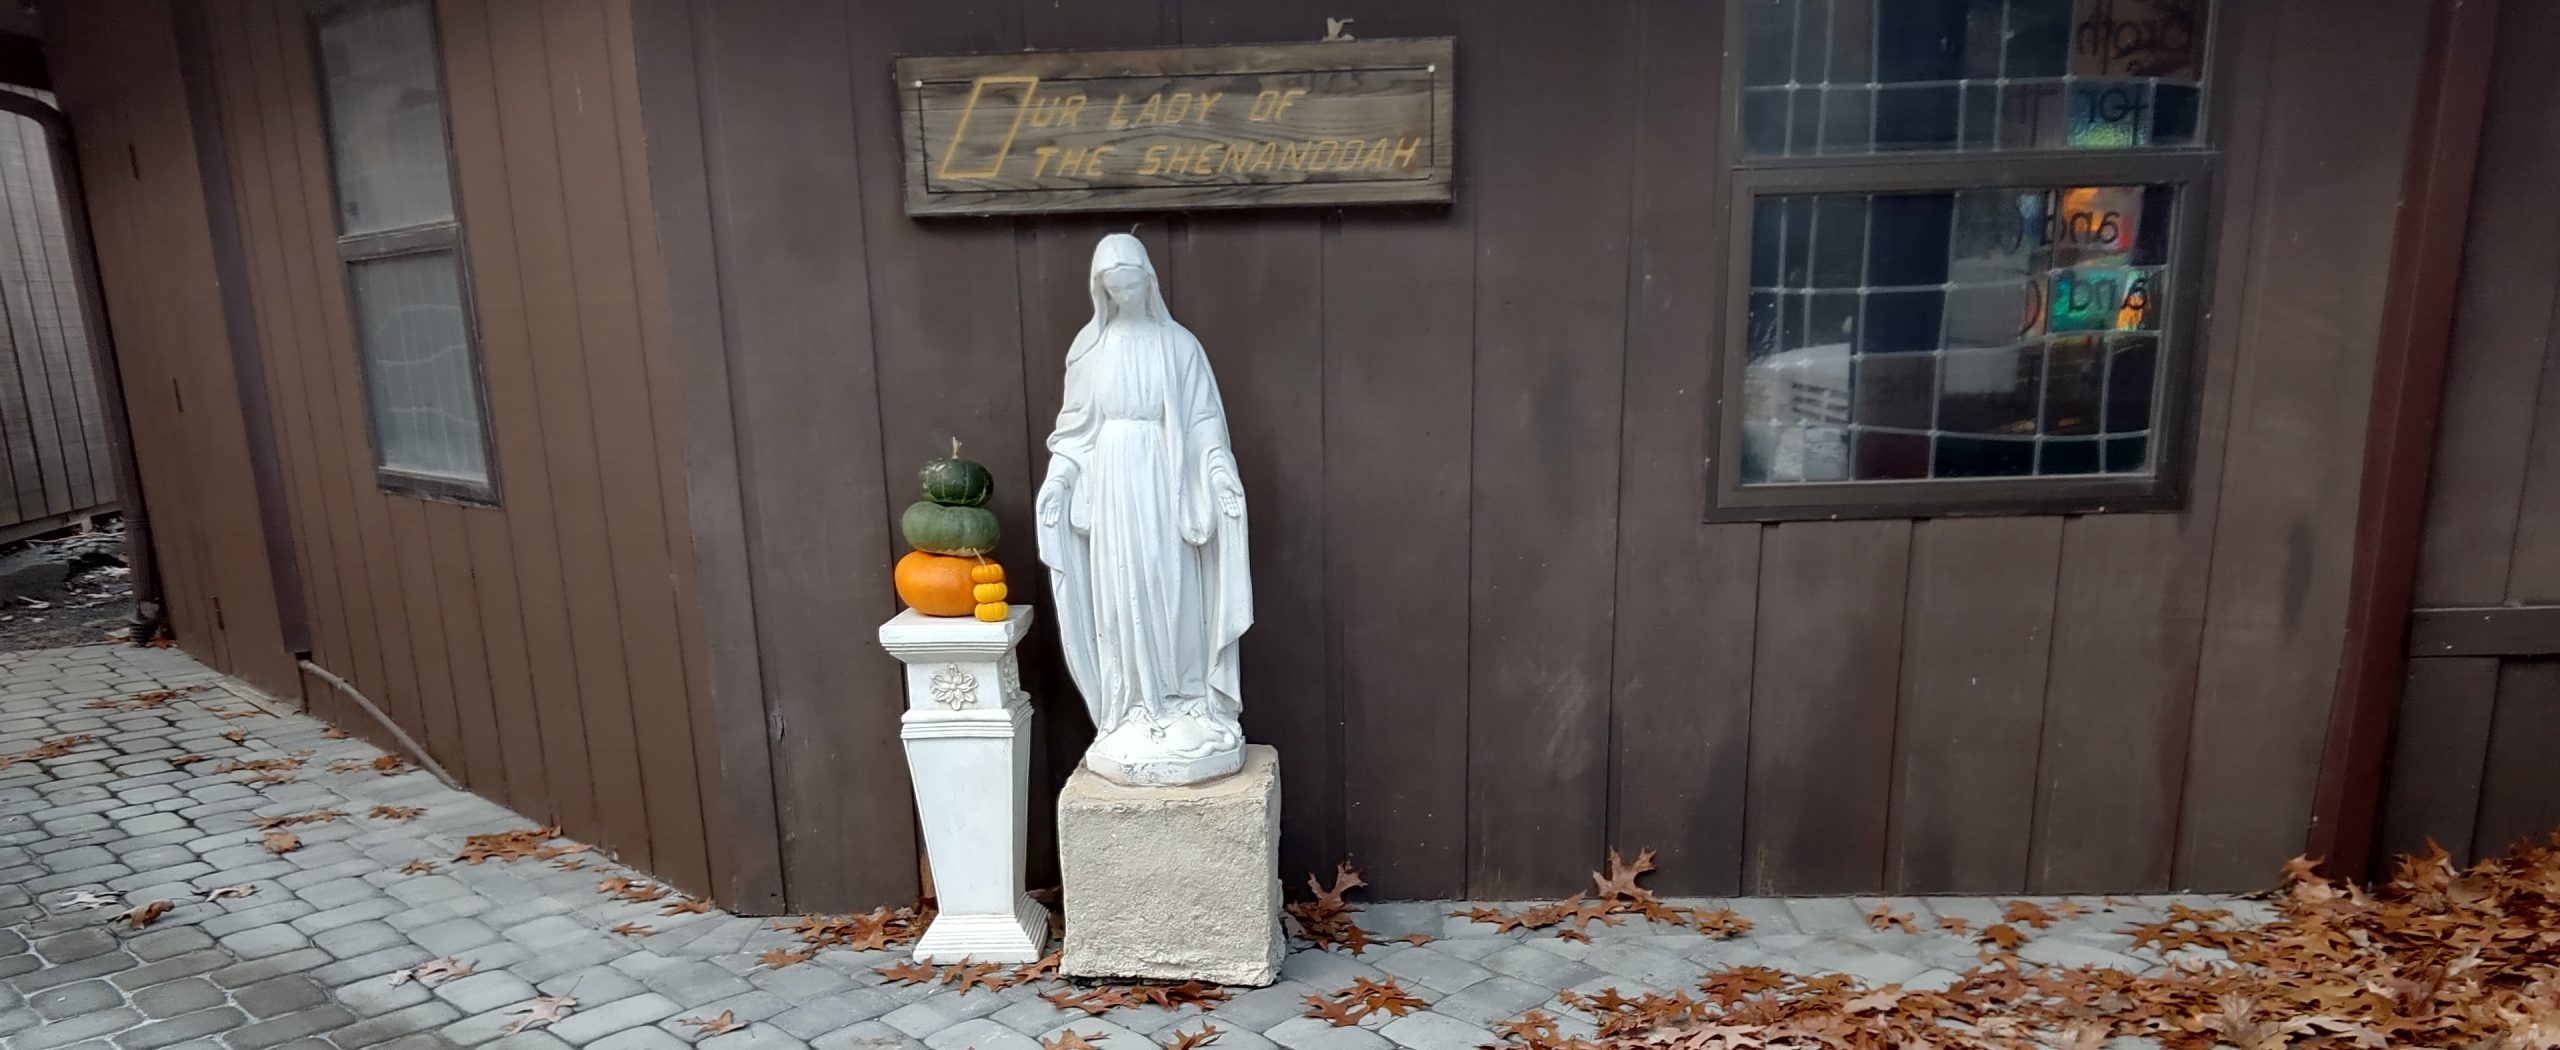 Visit No. 10: Our Lady of the Shenandoah